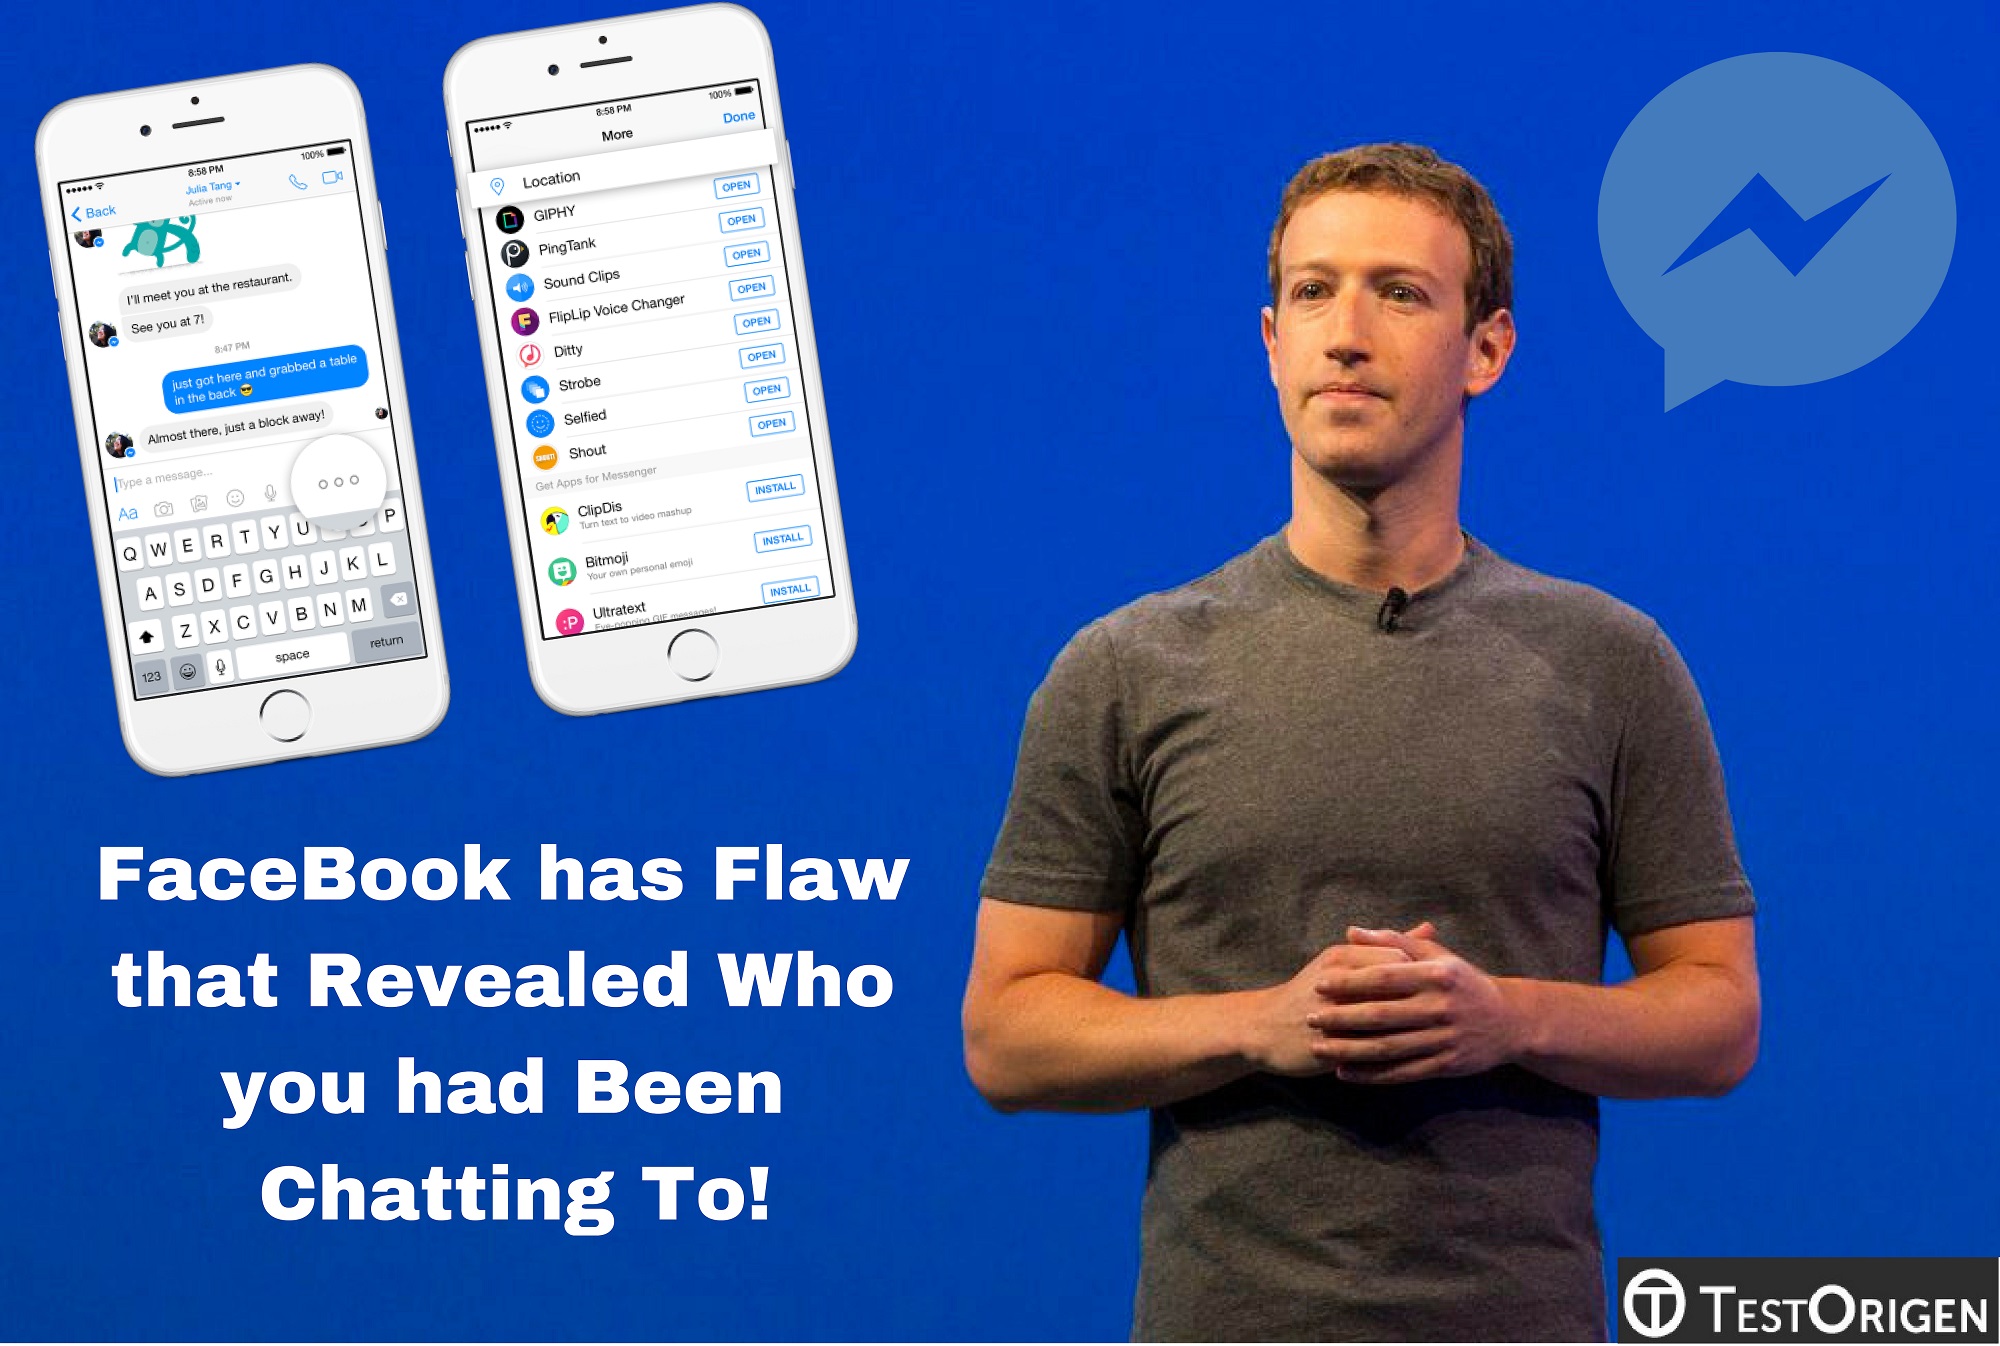 FaceBook has Flaw that Revealed Who you had Been Chatting To!